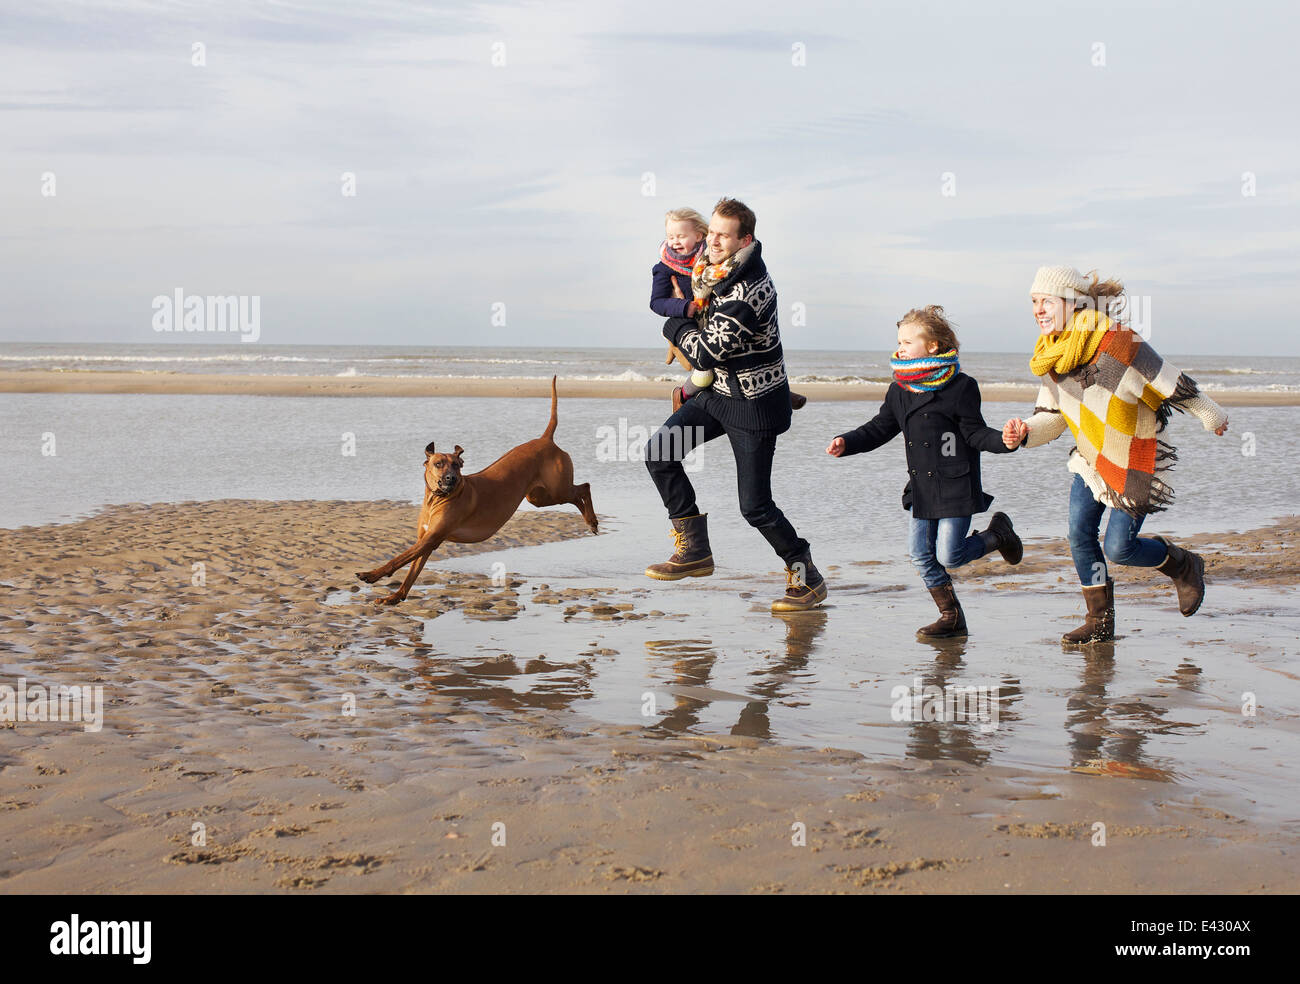 Mid adult parents with son, daughter and dog running on beach, Bloemendaal aan Zee, Netherlands Stock Photo